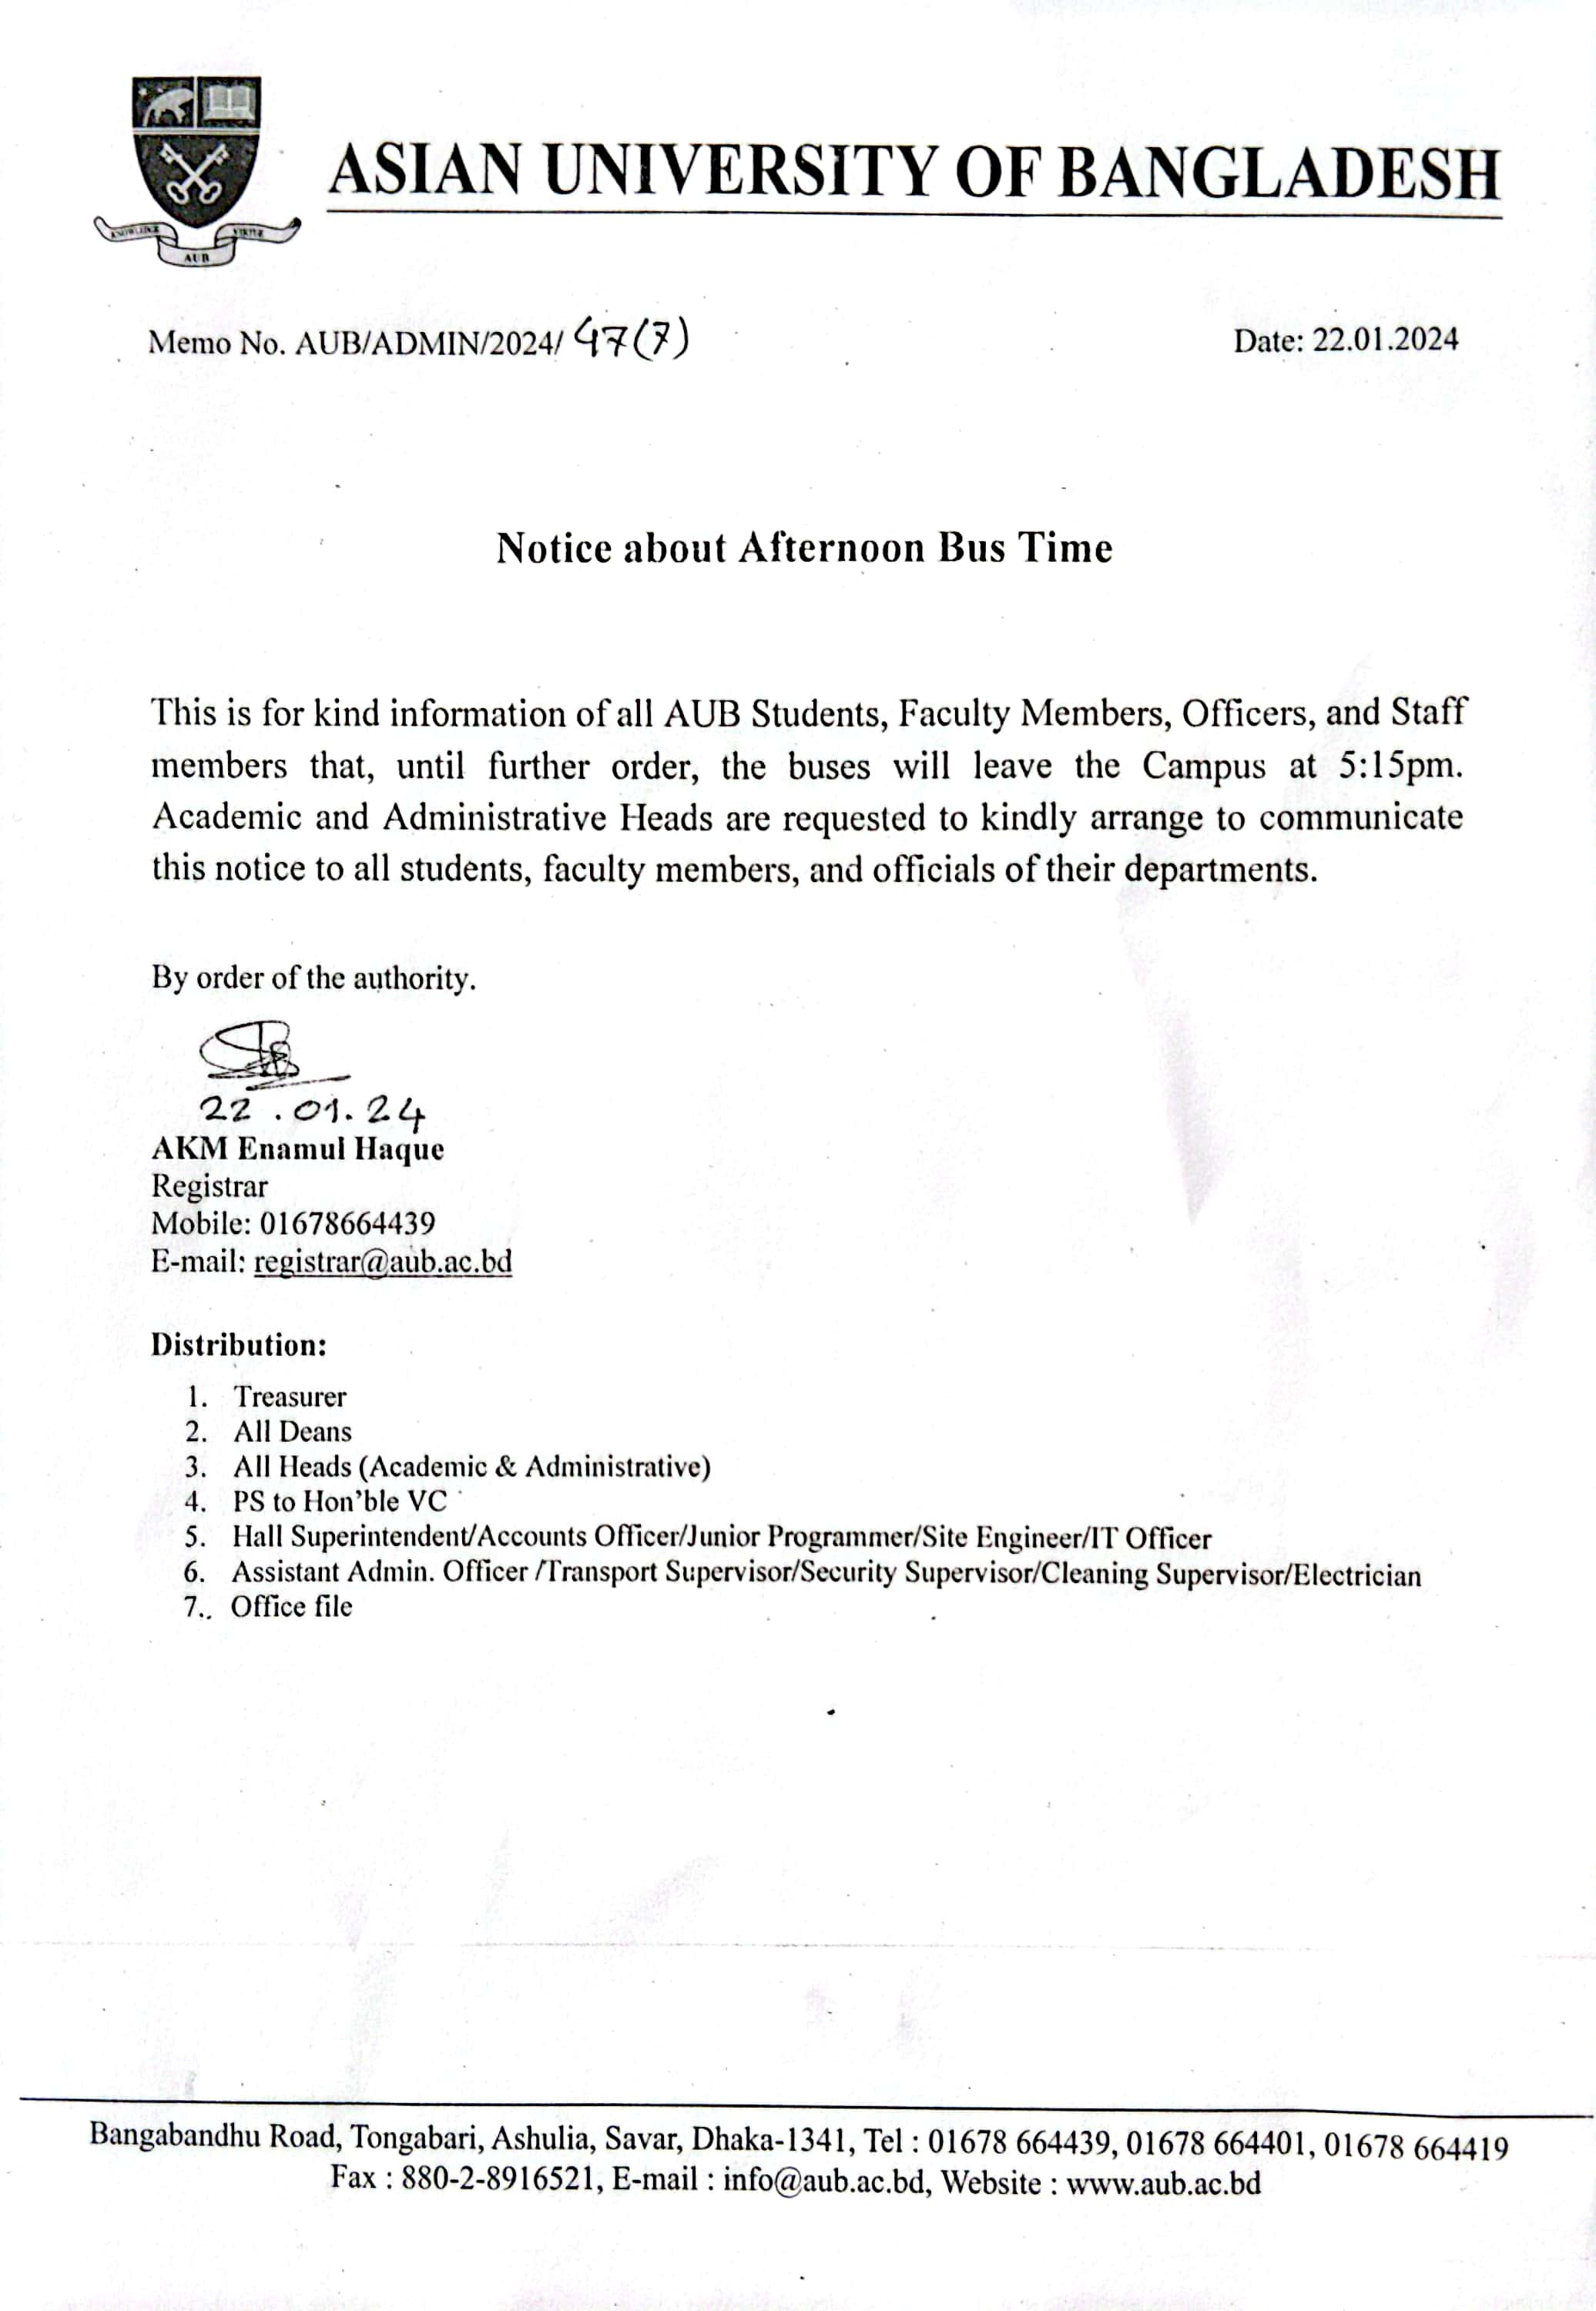 Notice for Afternoon Bus Time image